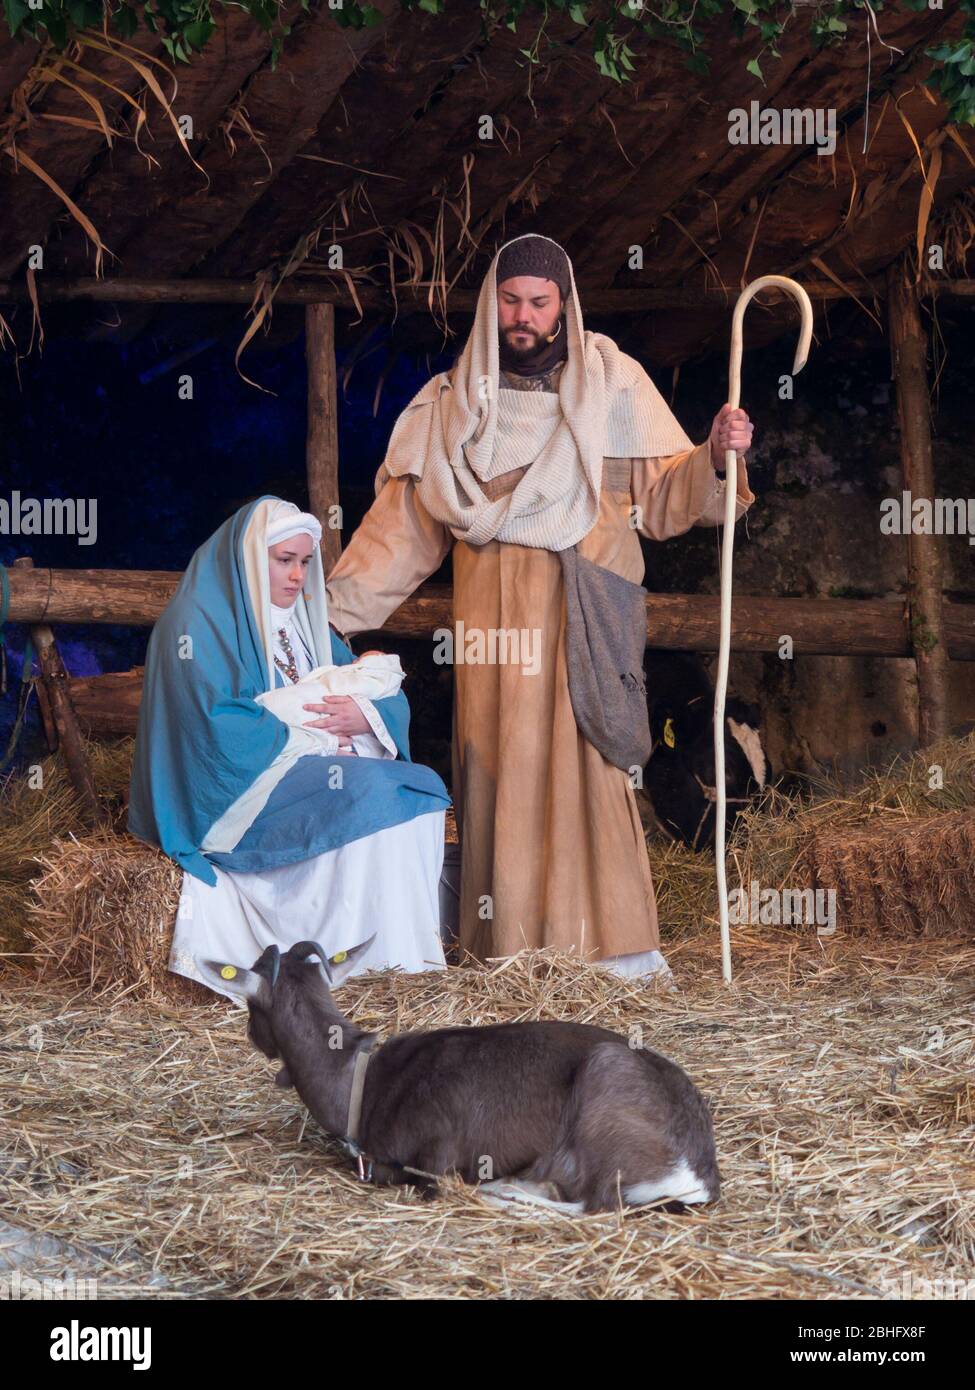 Vicenza, Italy - December 29, 2019: The holy family in the living nativity scene made on the occasion of Christmas. Stock Photo